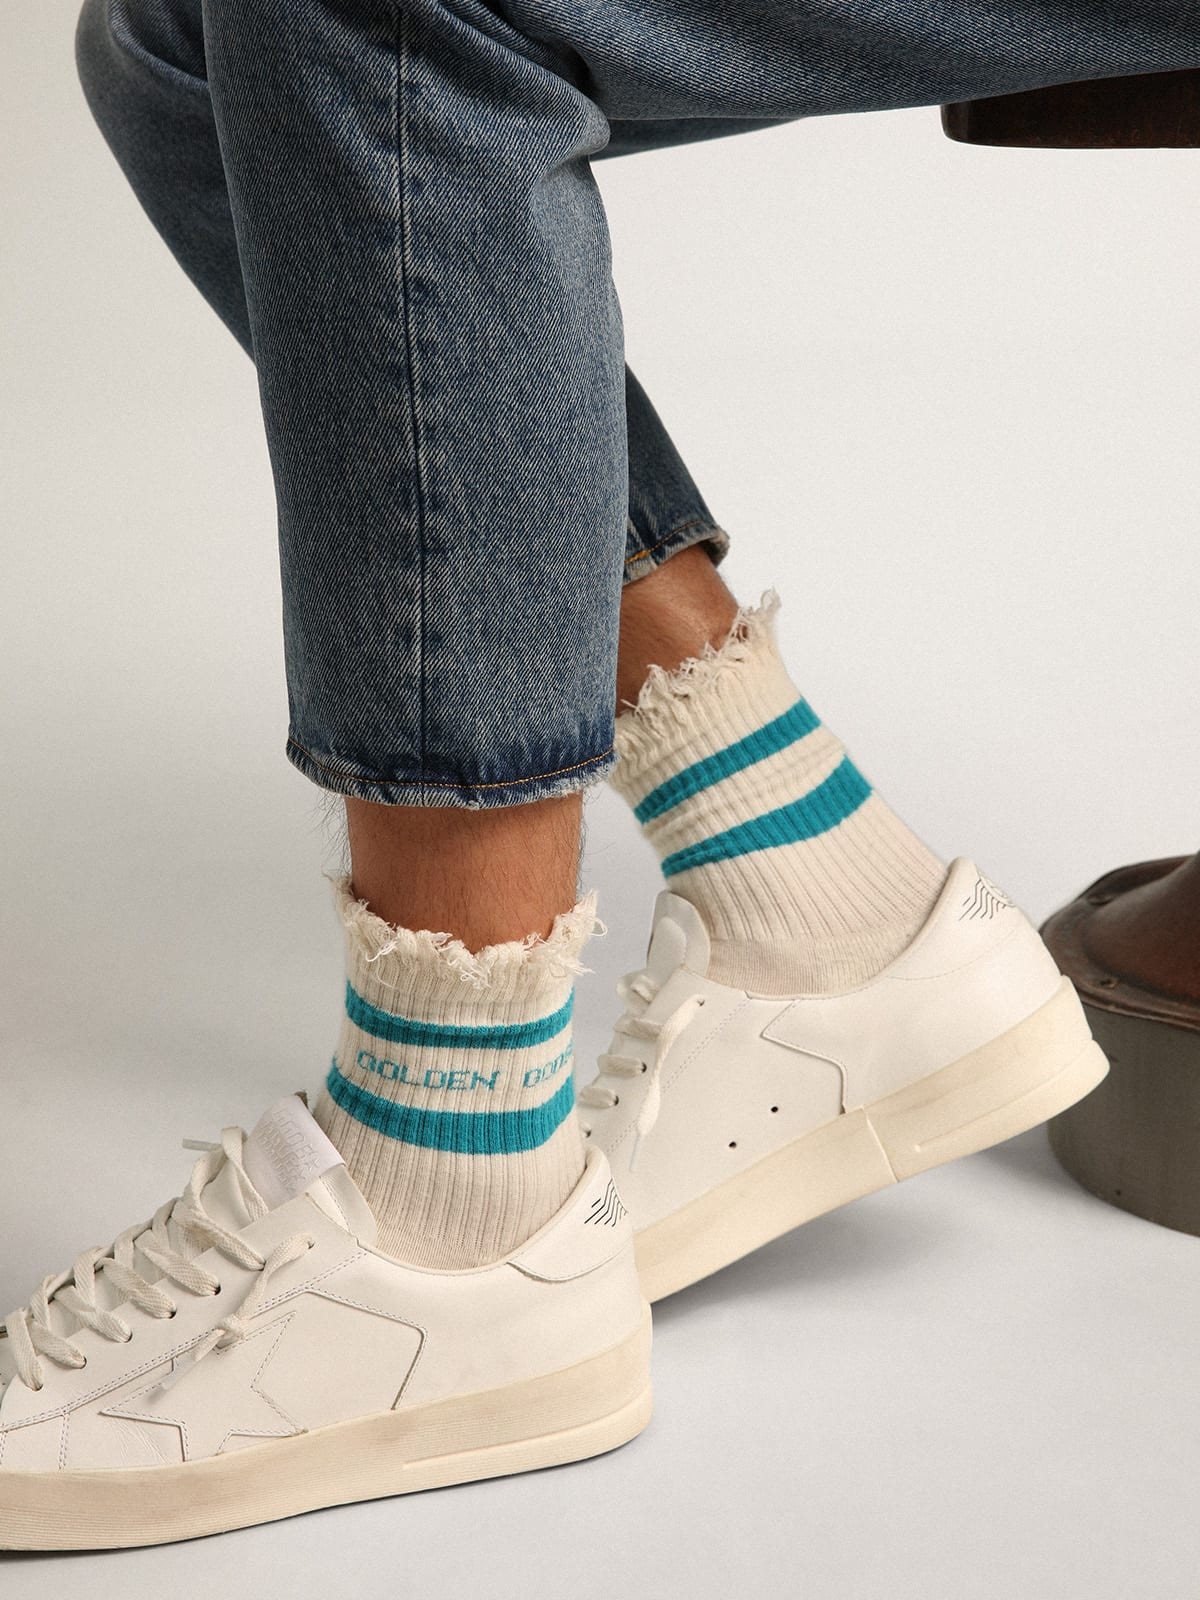 Distressed-finish white socks with turquoise logo and stripes - 4